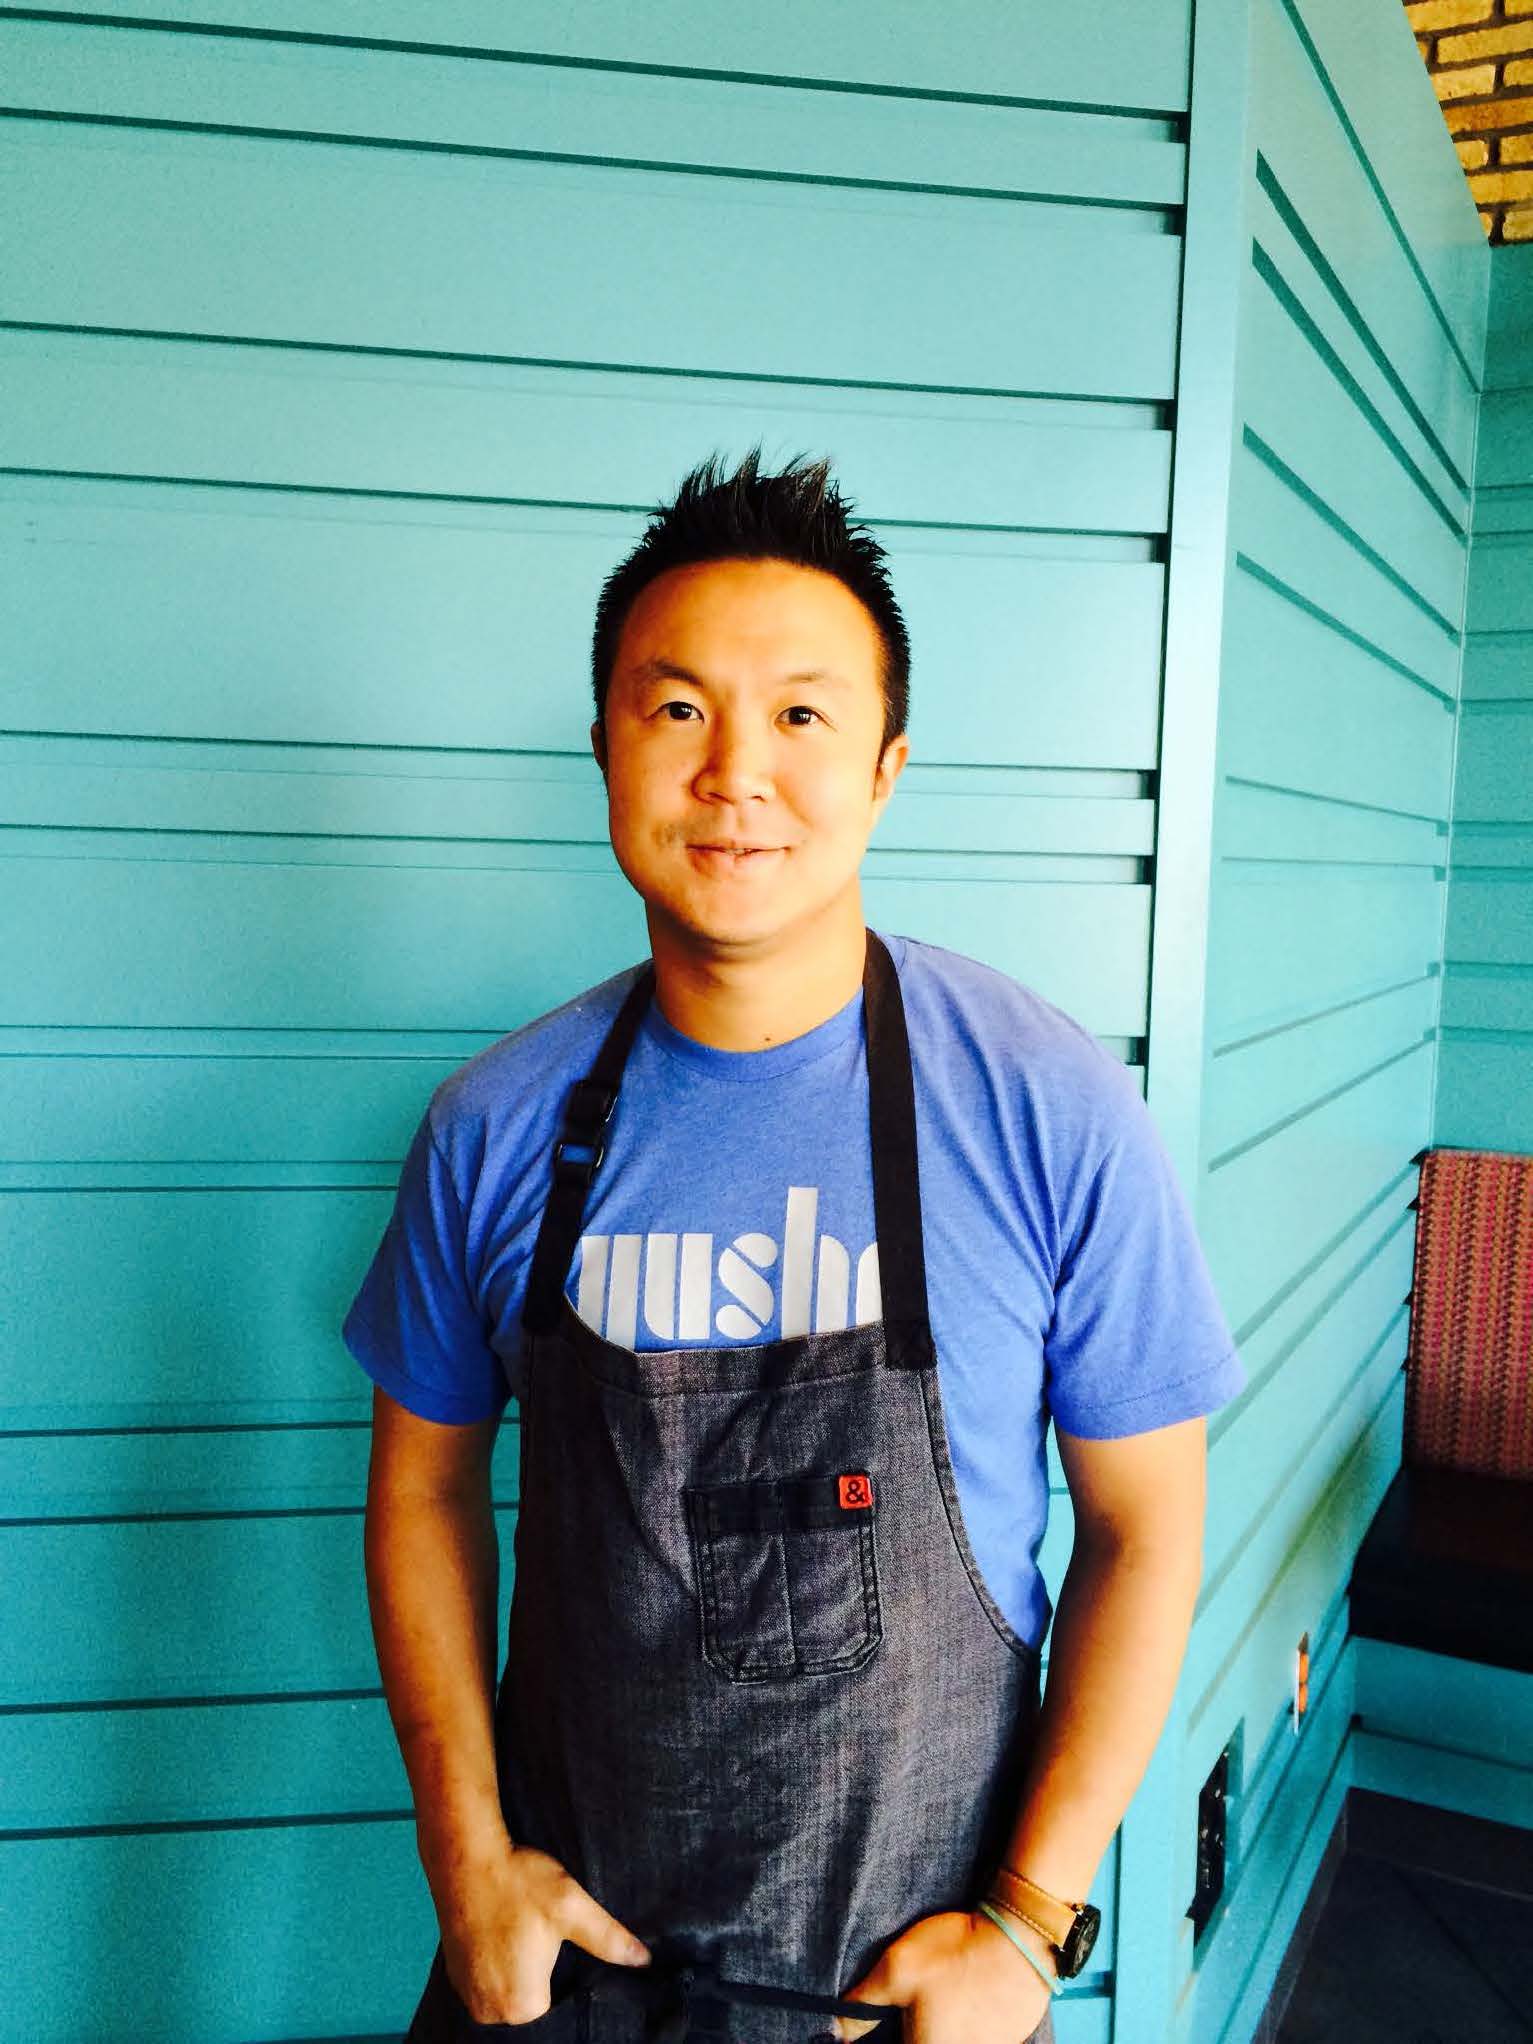 A chef wears a blue T-shirt and a black apron